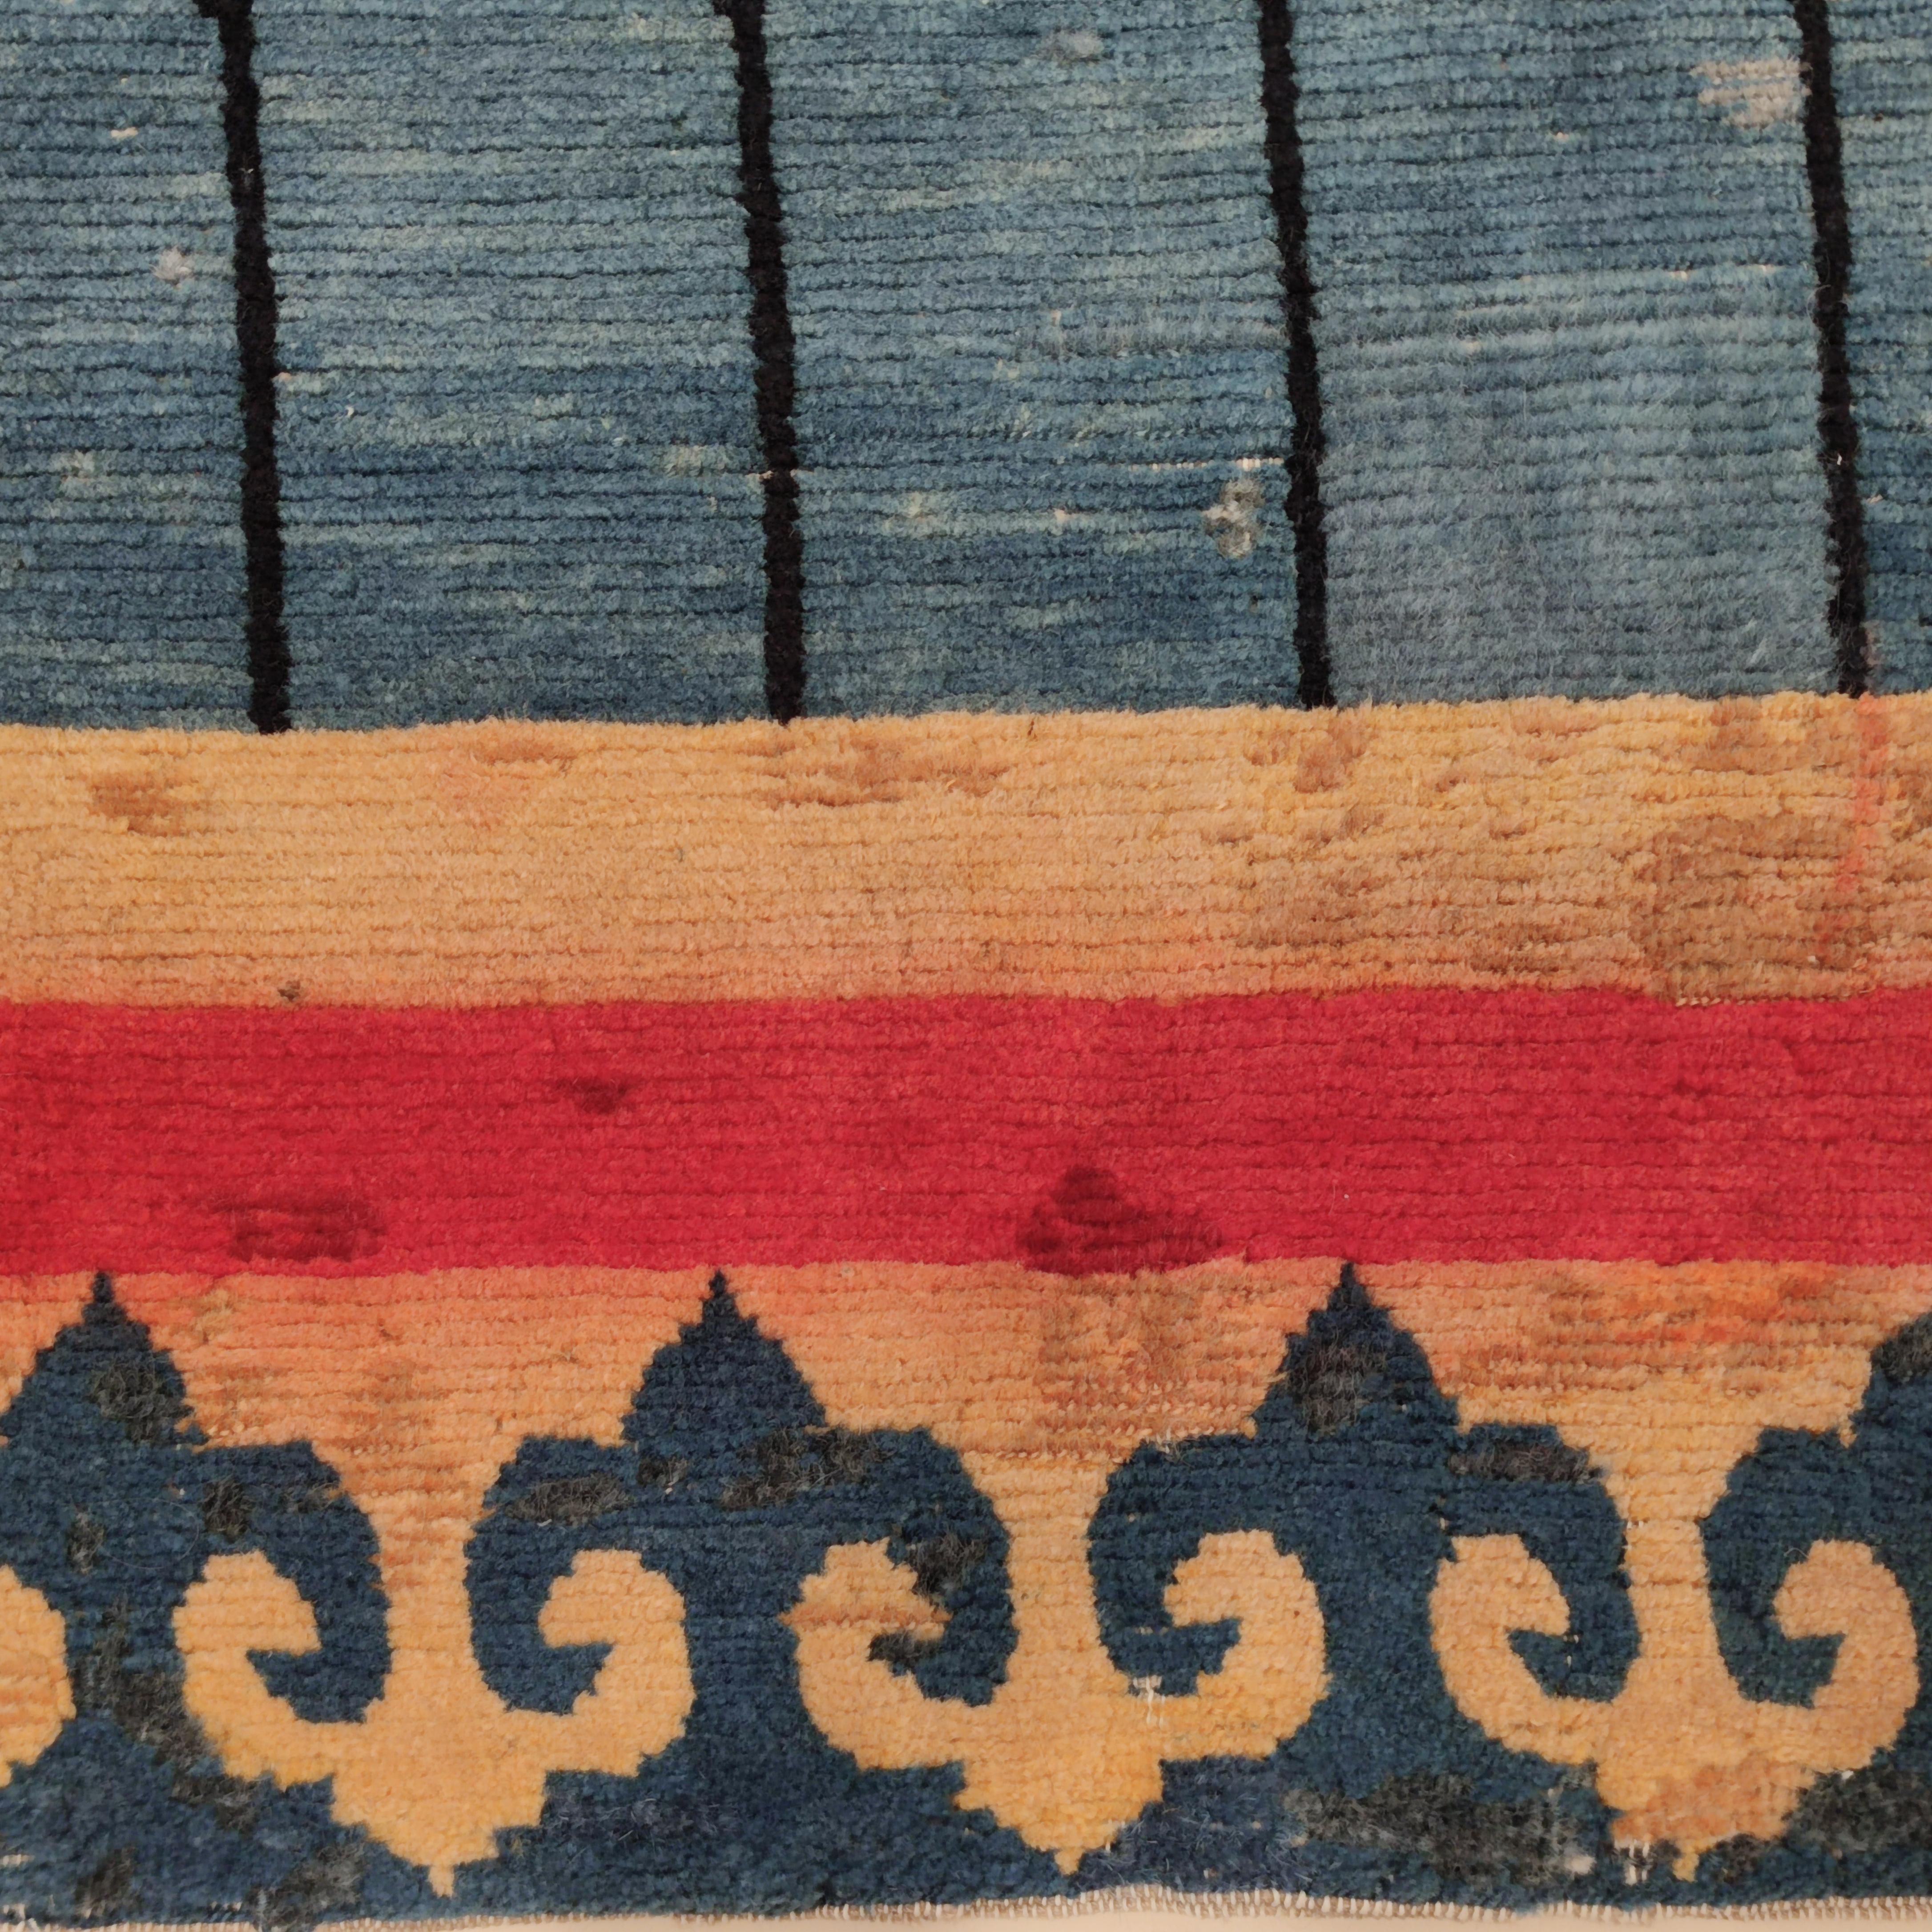 An extremely rare example of Tibetan door rug, known with this term because the design mimics the same exact motifs present on the silk and cotton brocades which sometimes decorate the façades of traditional Tibetan houses. These brocades used to be